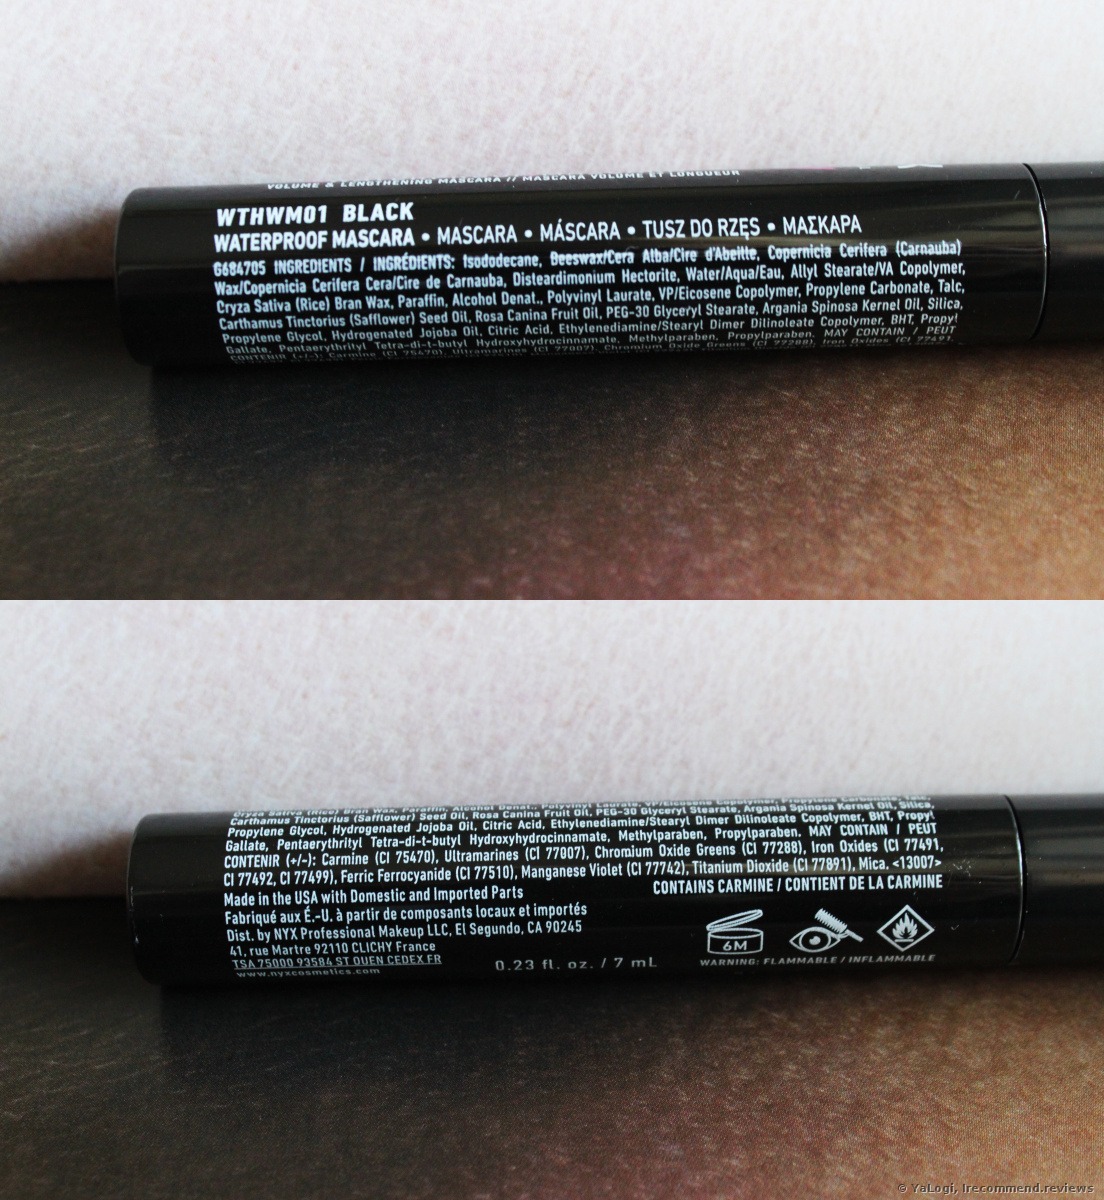 good mascara is hype? shots never The BEFORE/AFTER Mascara worth reviews «Is Waterproof NYX » | - it awesome. This really the Hype but Worth Consumer